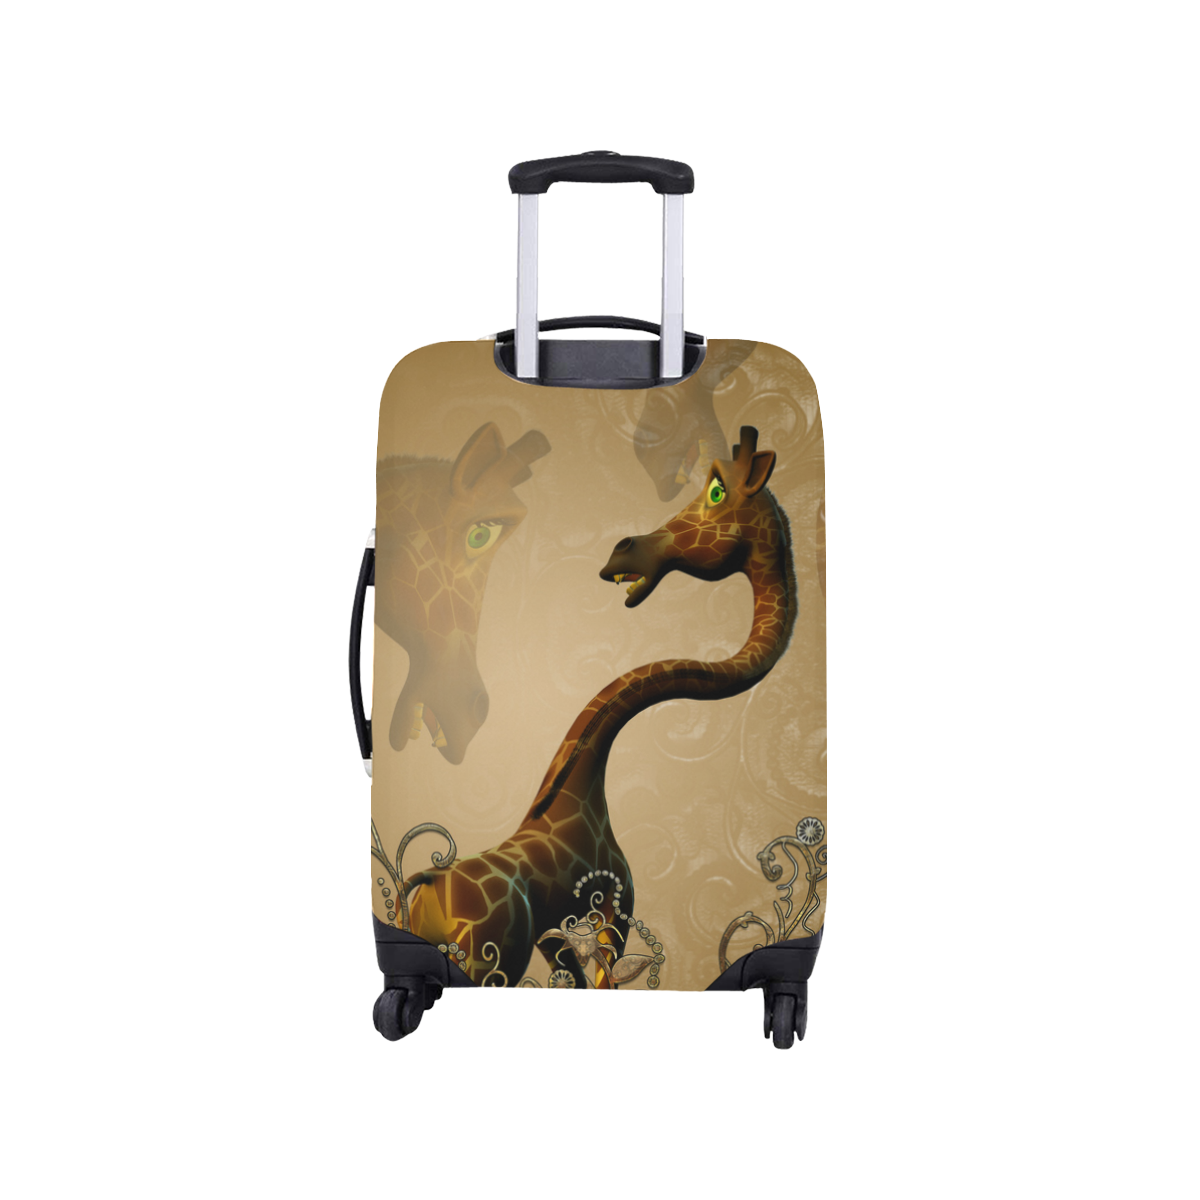 Little frightened giraffe Luggage Cover/Small 18"-21"